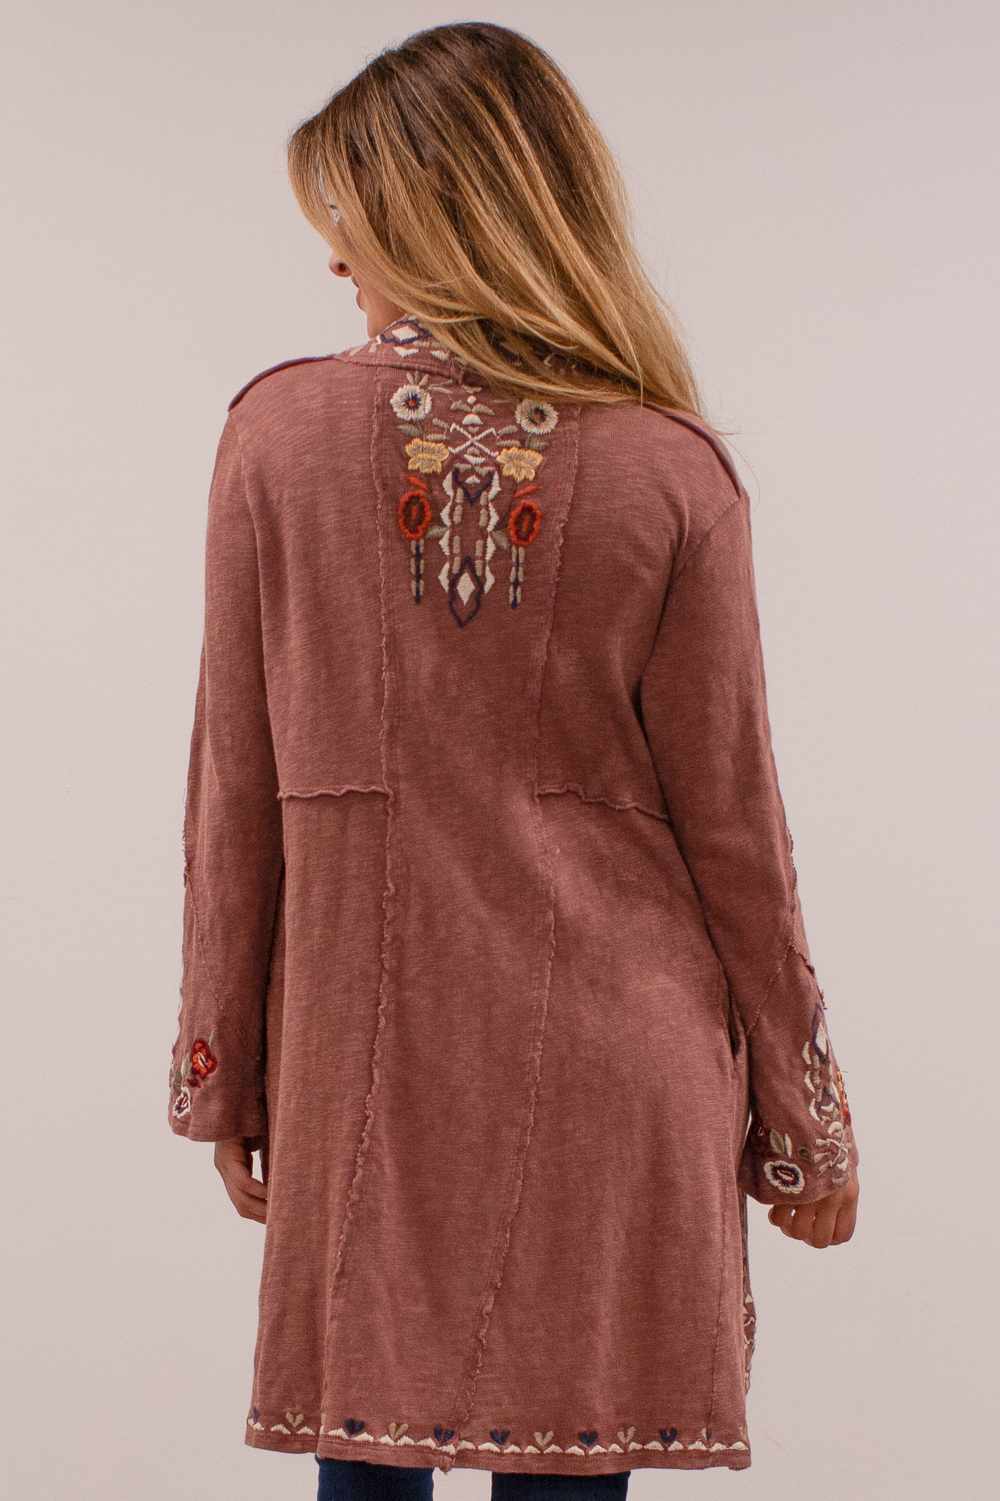 Caite Isa jacket, open-front embroidered